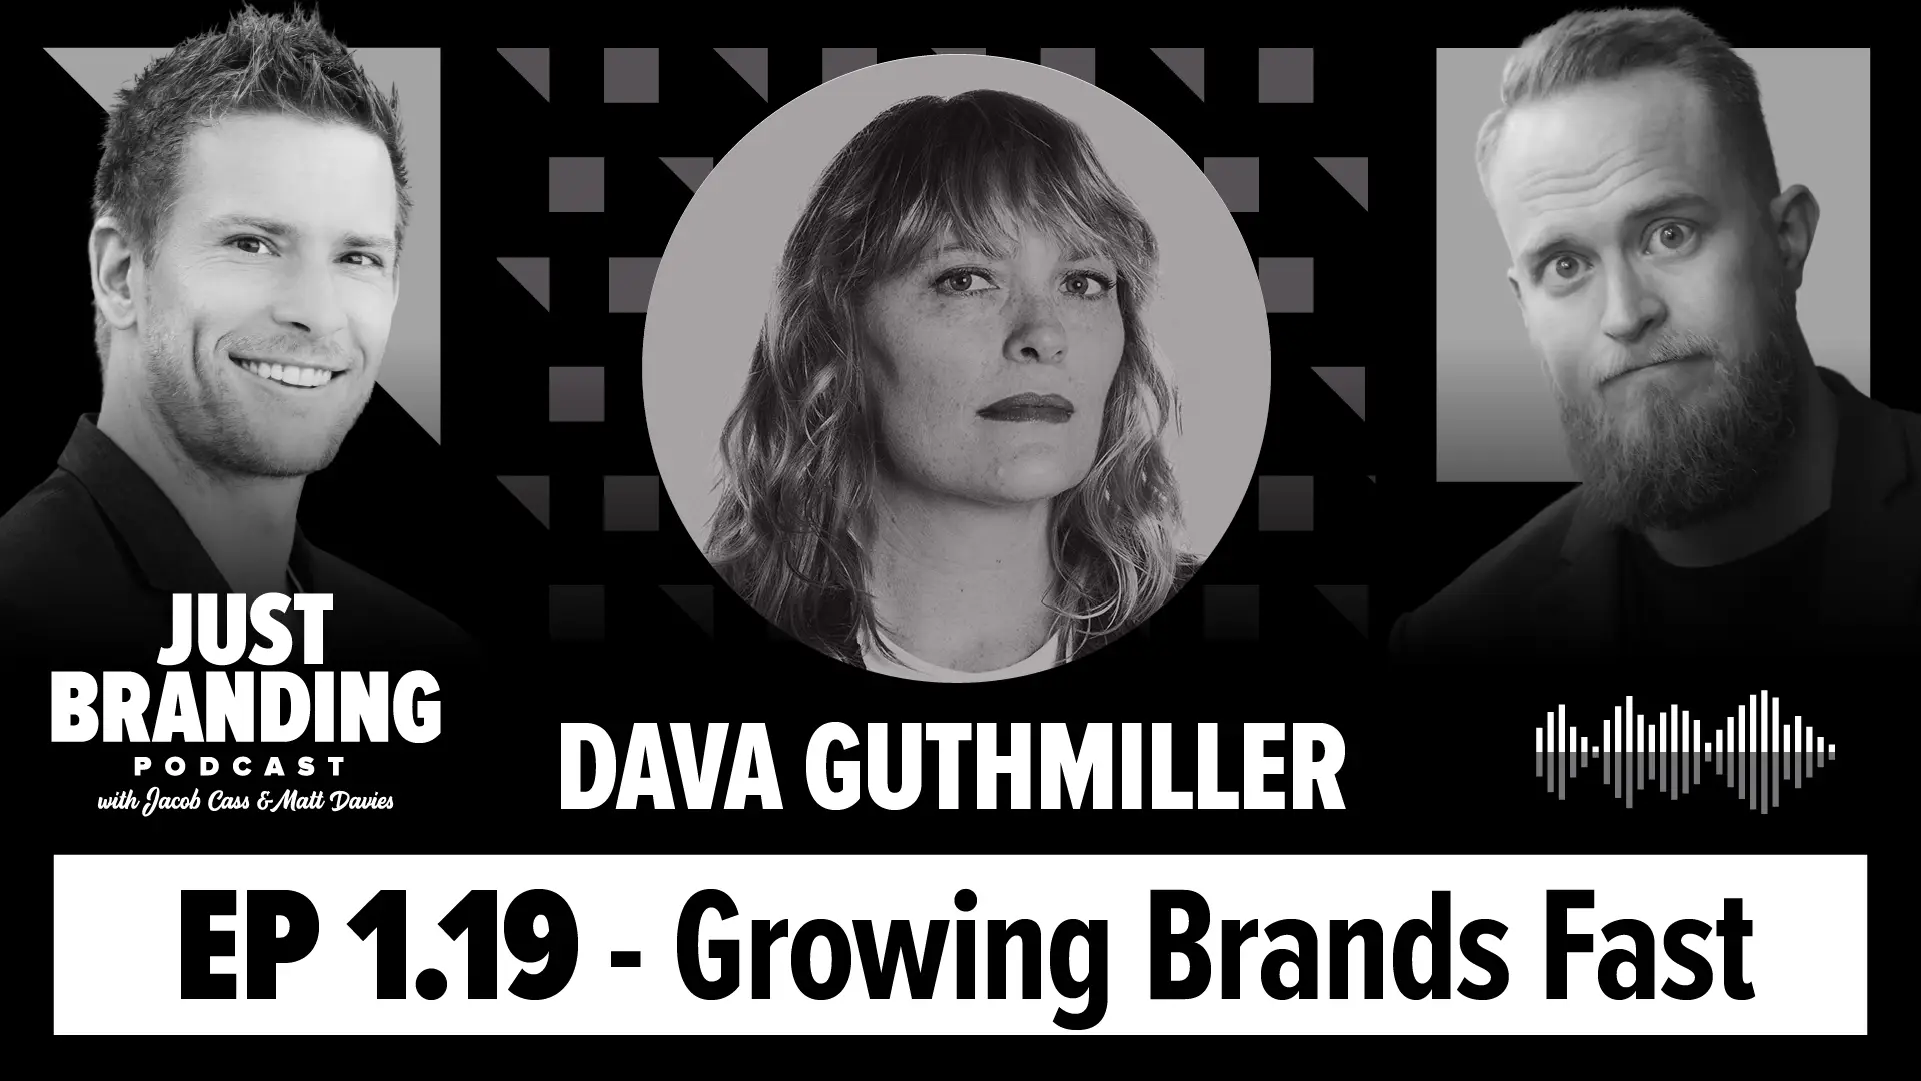 How to Grow Real Brands with Dava Guthmiller